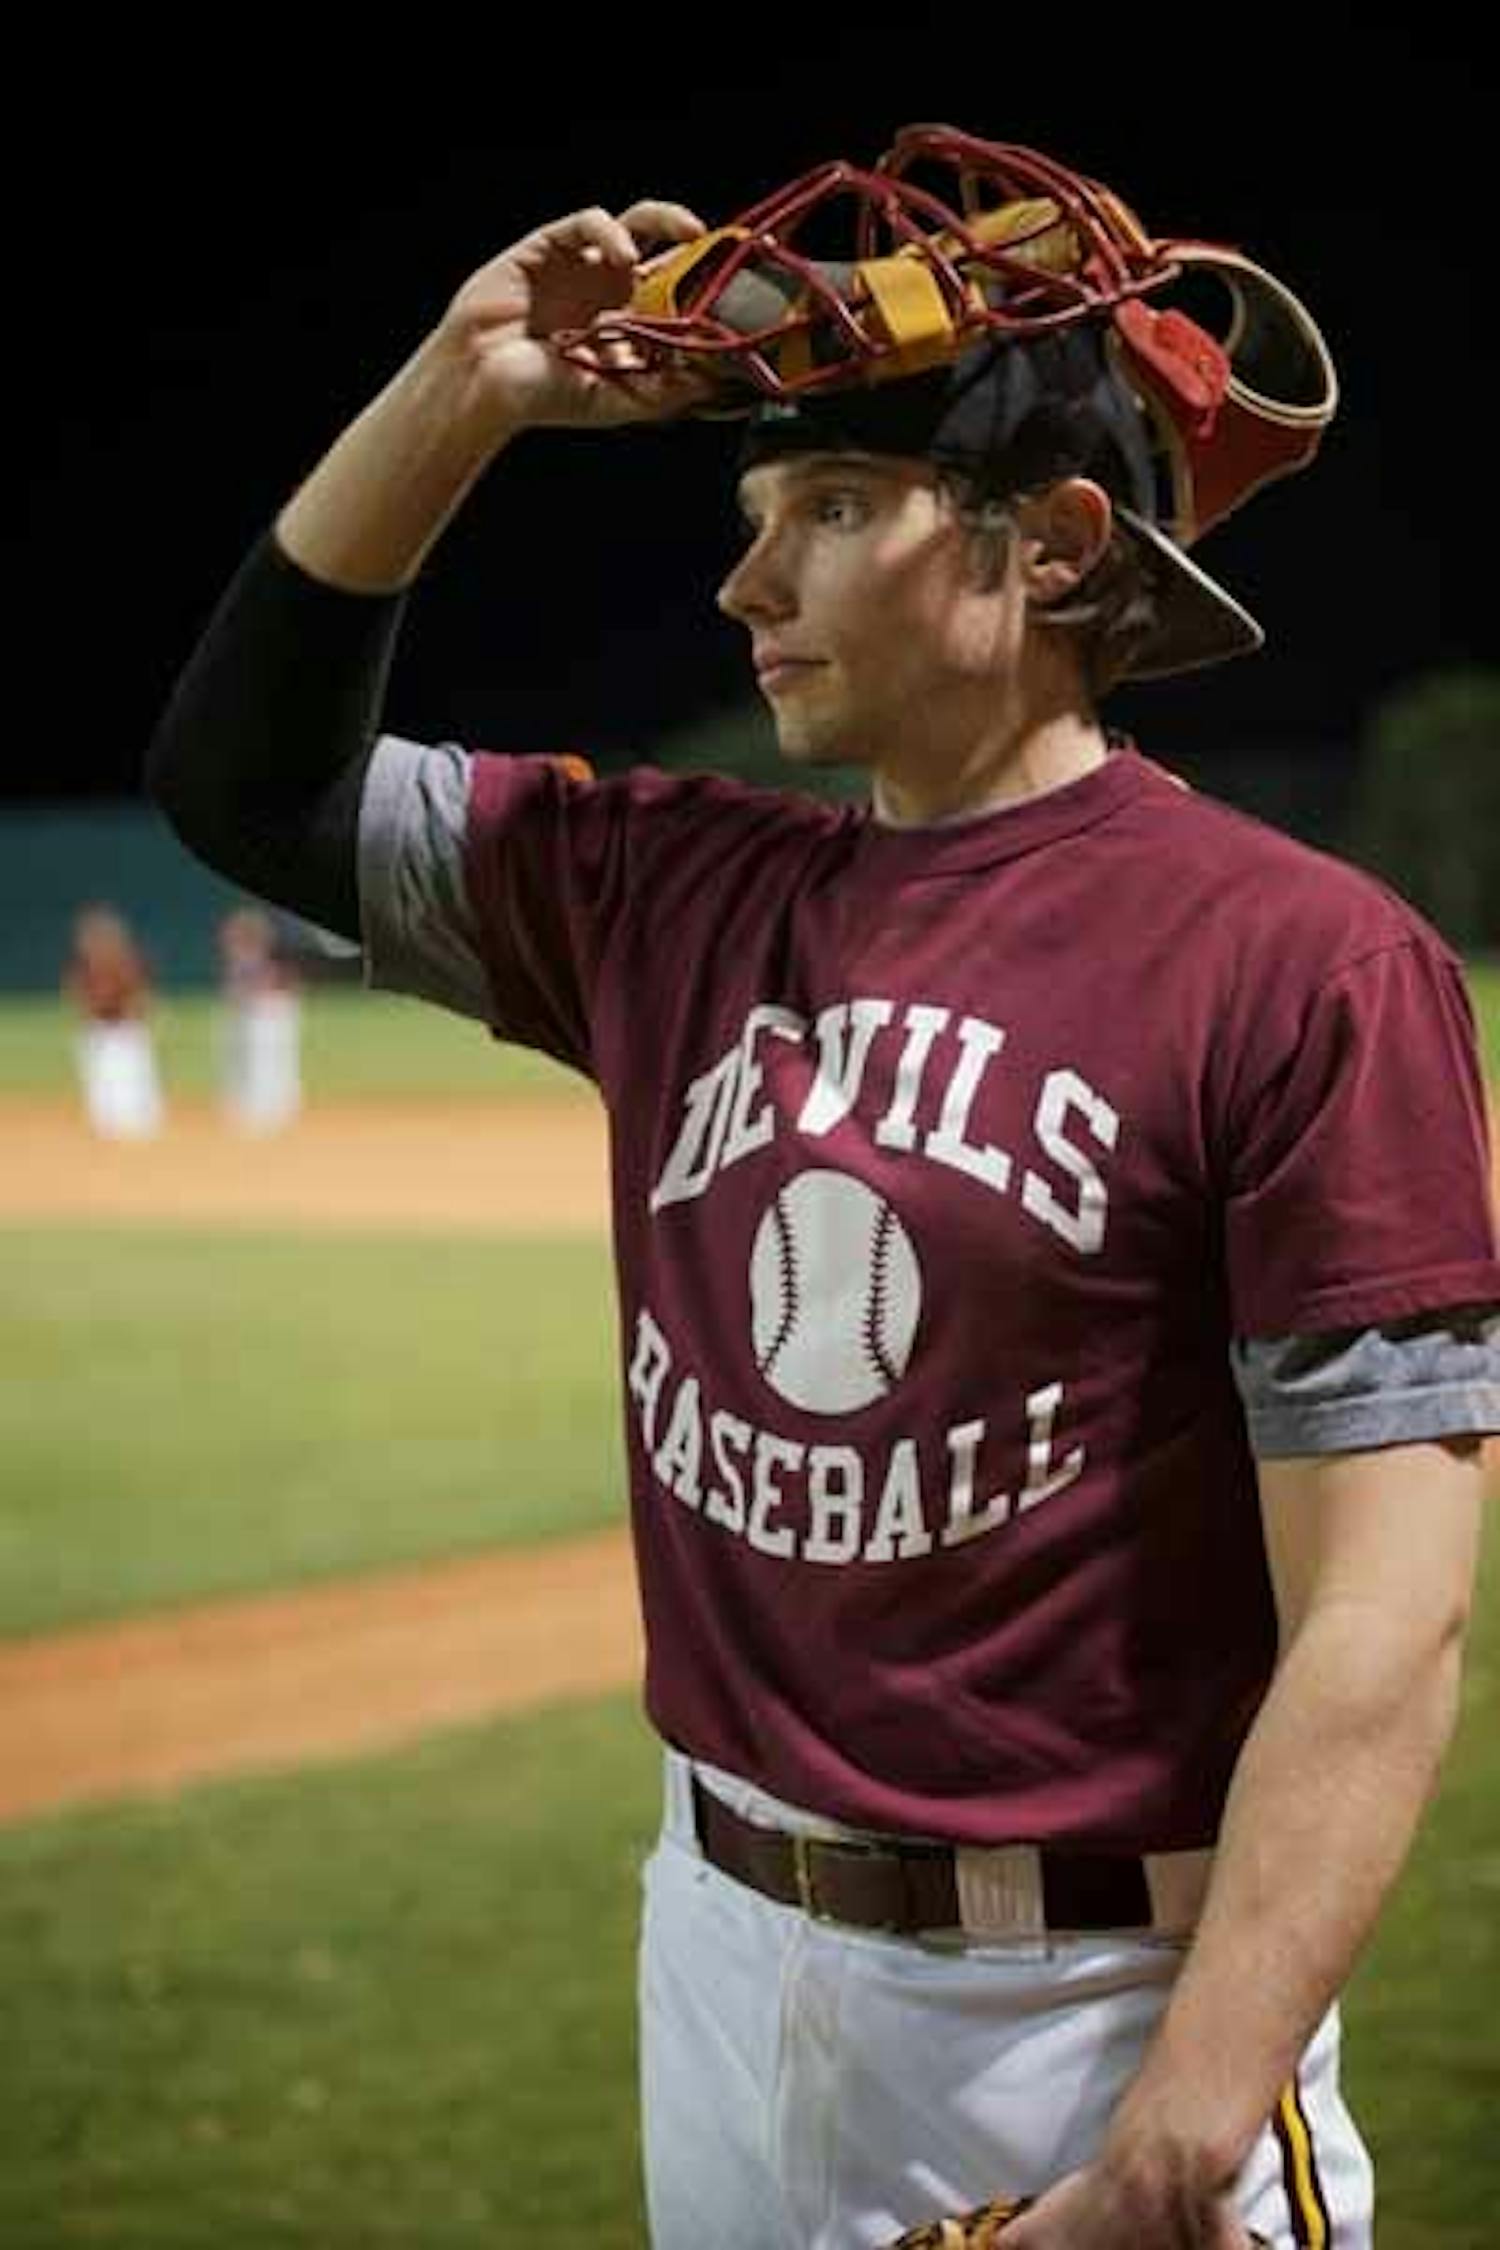 PREPERATION: Senior catcher Nick Morreale takes a break during the ASU club baseball team’s practice Tuesday night. The Sun Devils are working to mix new talent in with their already-experienced roster. (Photo by Michael Arellano)